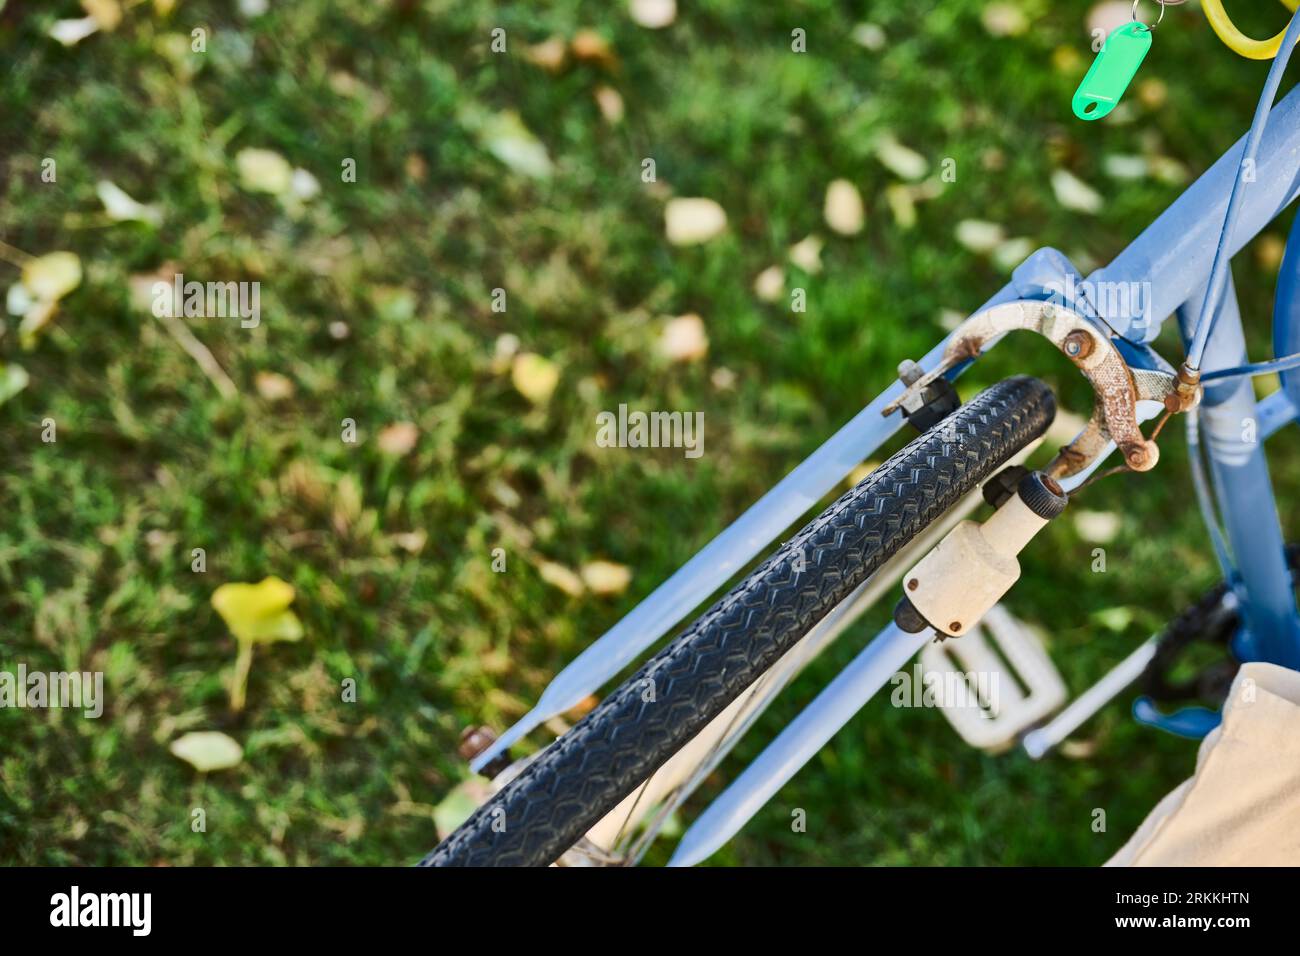 detail of front wheel and brake with dynamo of vintage bicycle on grass background. Stock Photo